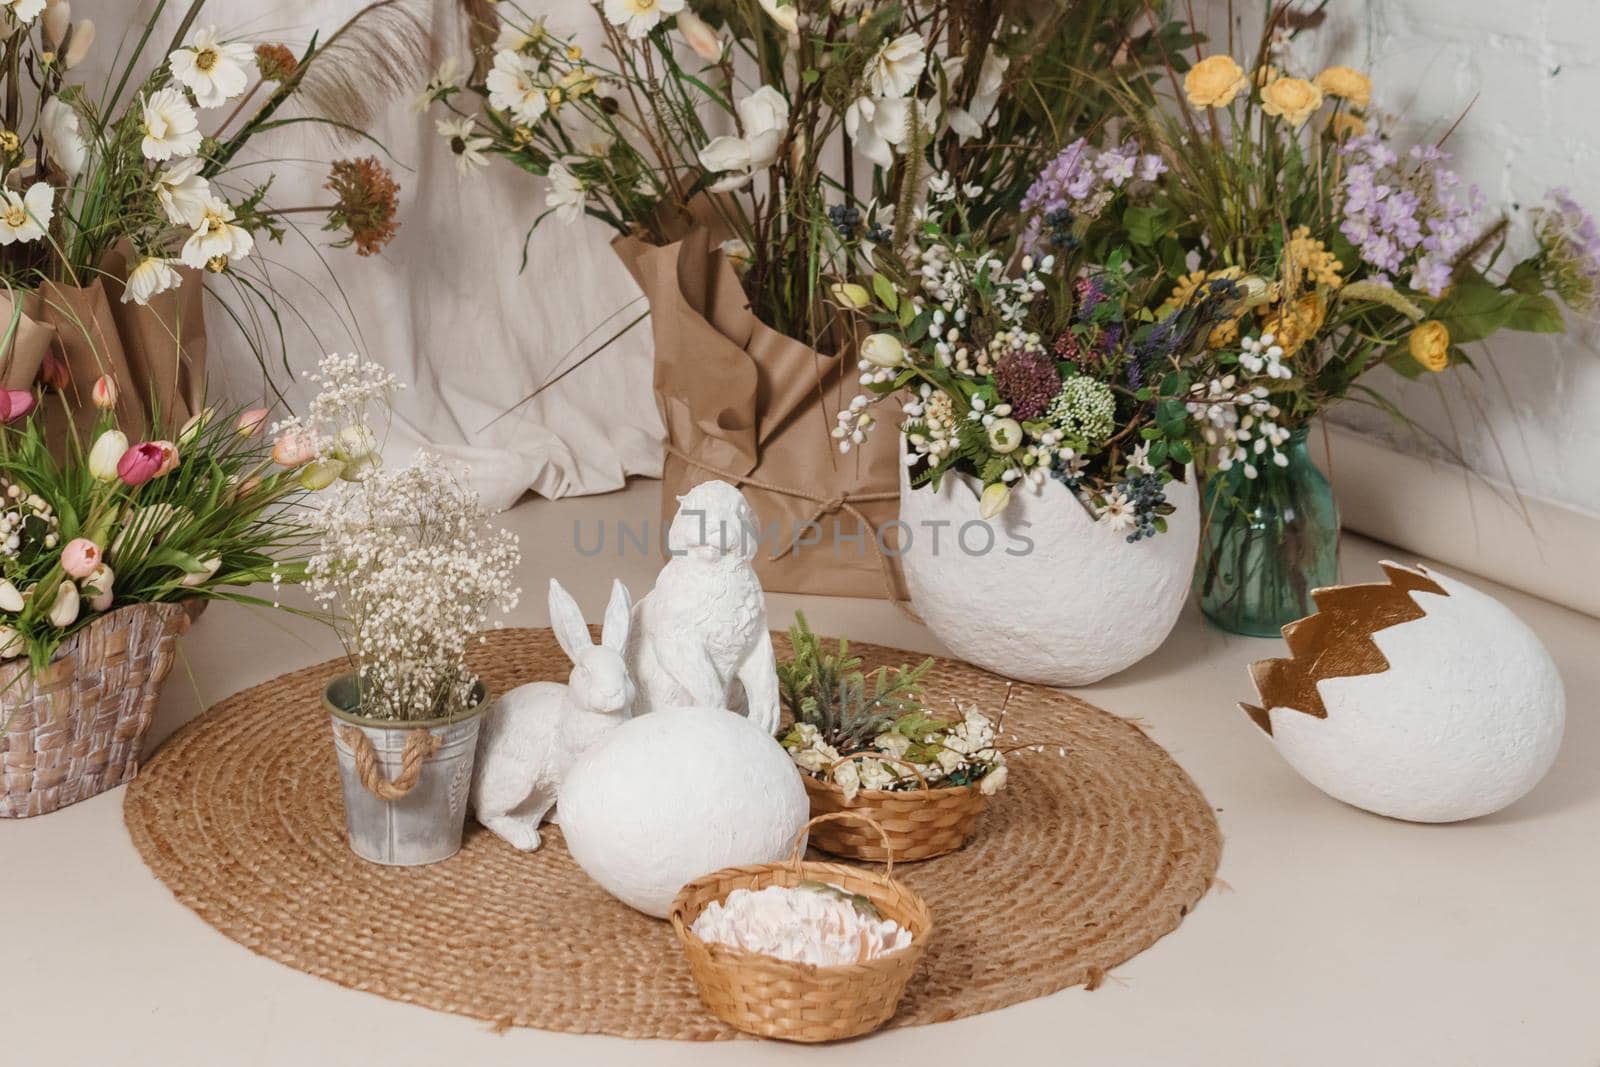 Interior floral Easter composition. Figurines of Easter bunnies and a large eggshell. The concept of home decoration for the Happy Easter holiday